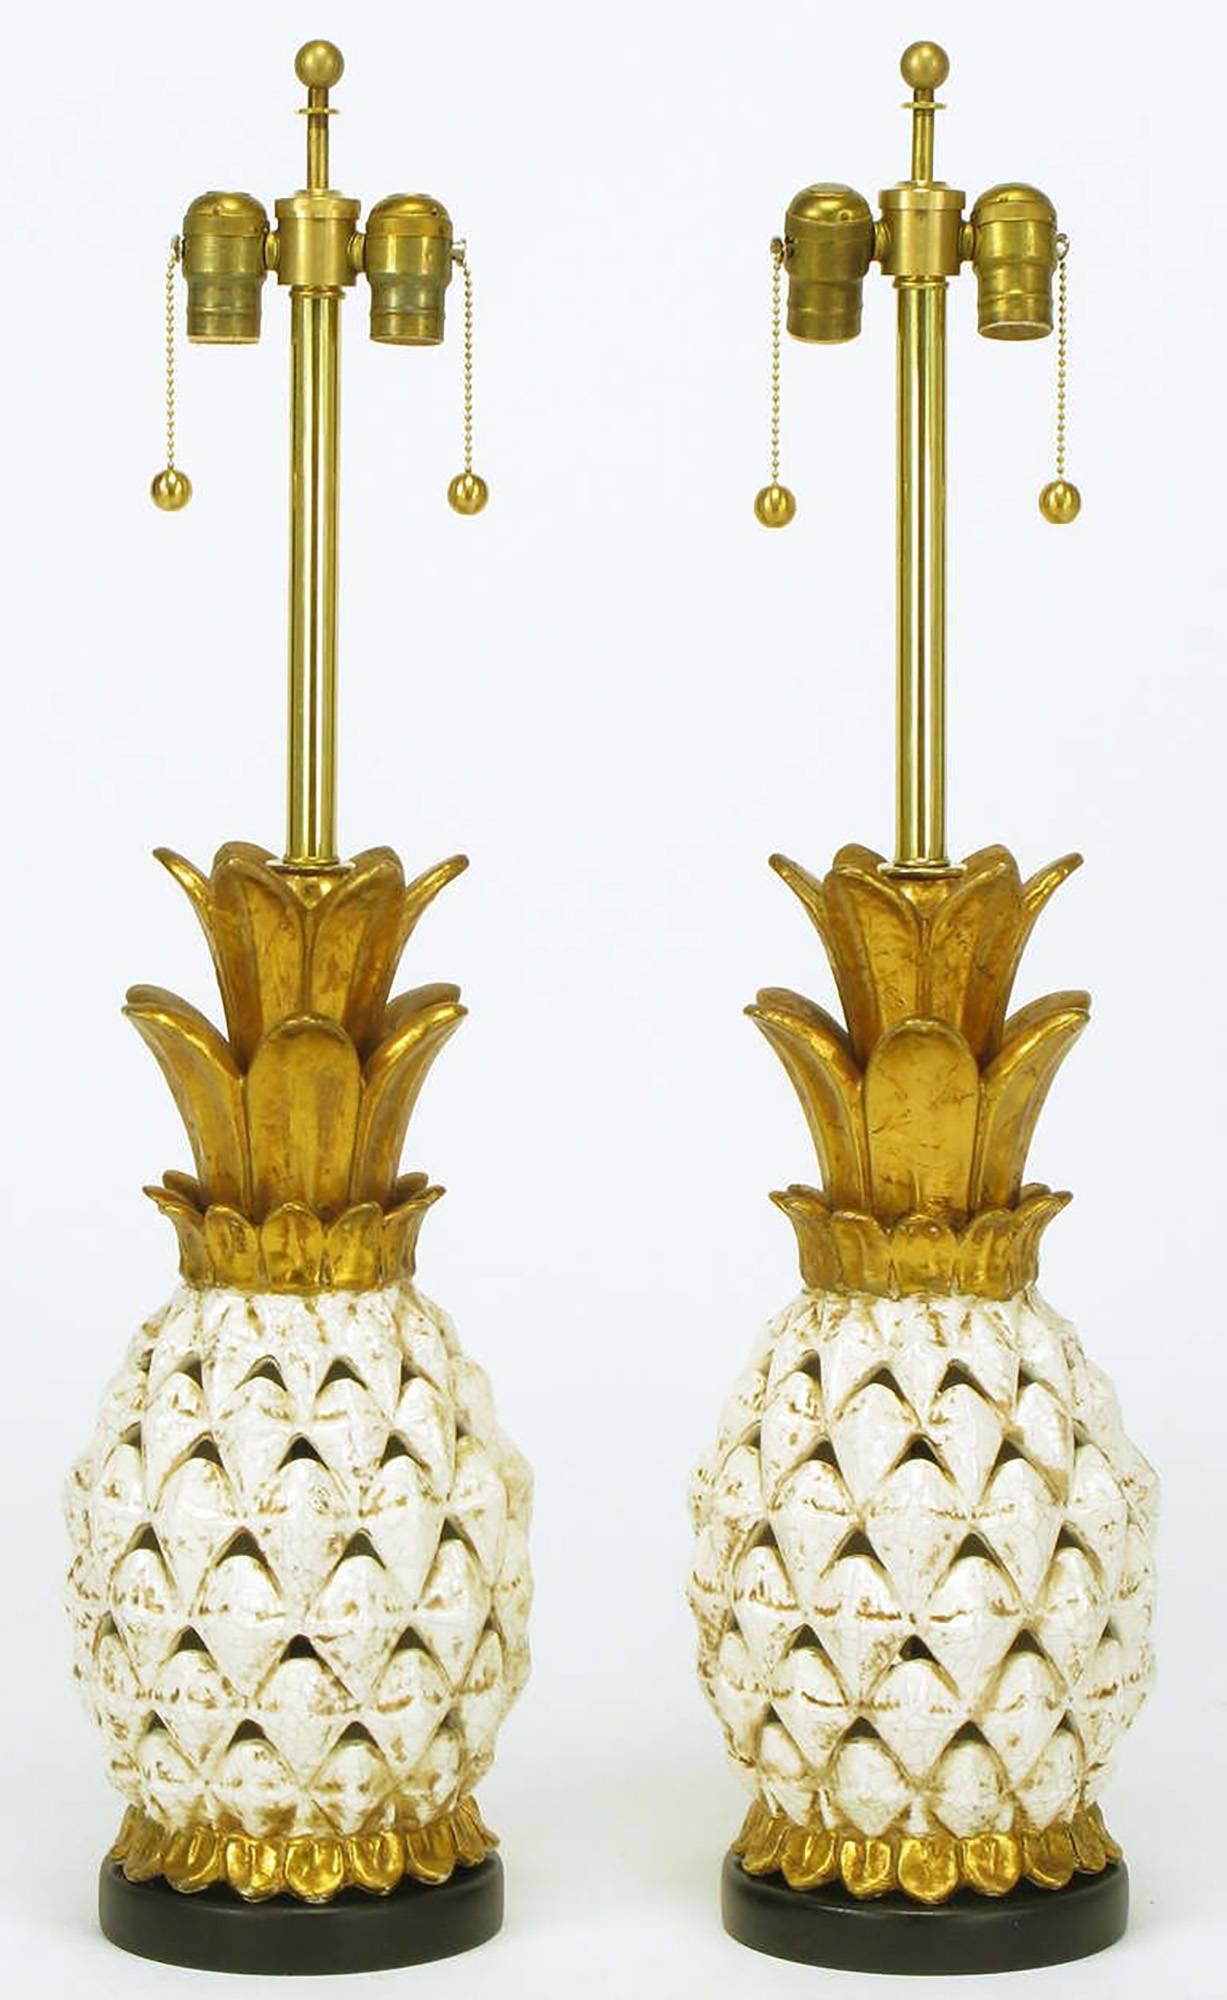 Pair of pierced ceramic body table lamps in the shape of white glazed and parcel-gilt pineapples with gilt crown. Black lacquered wood base, brass stems and double sockets with ball end pull chain.